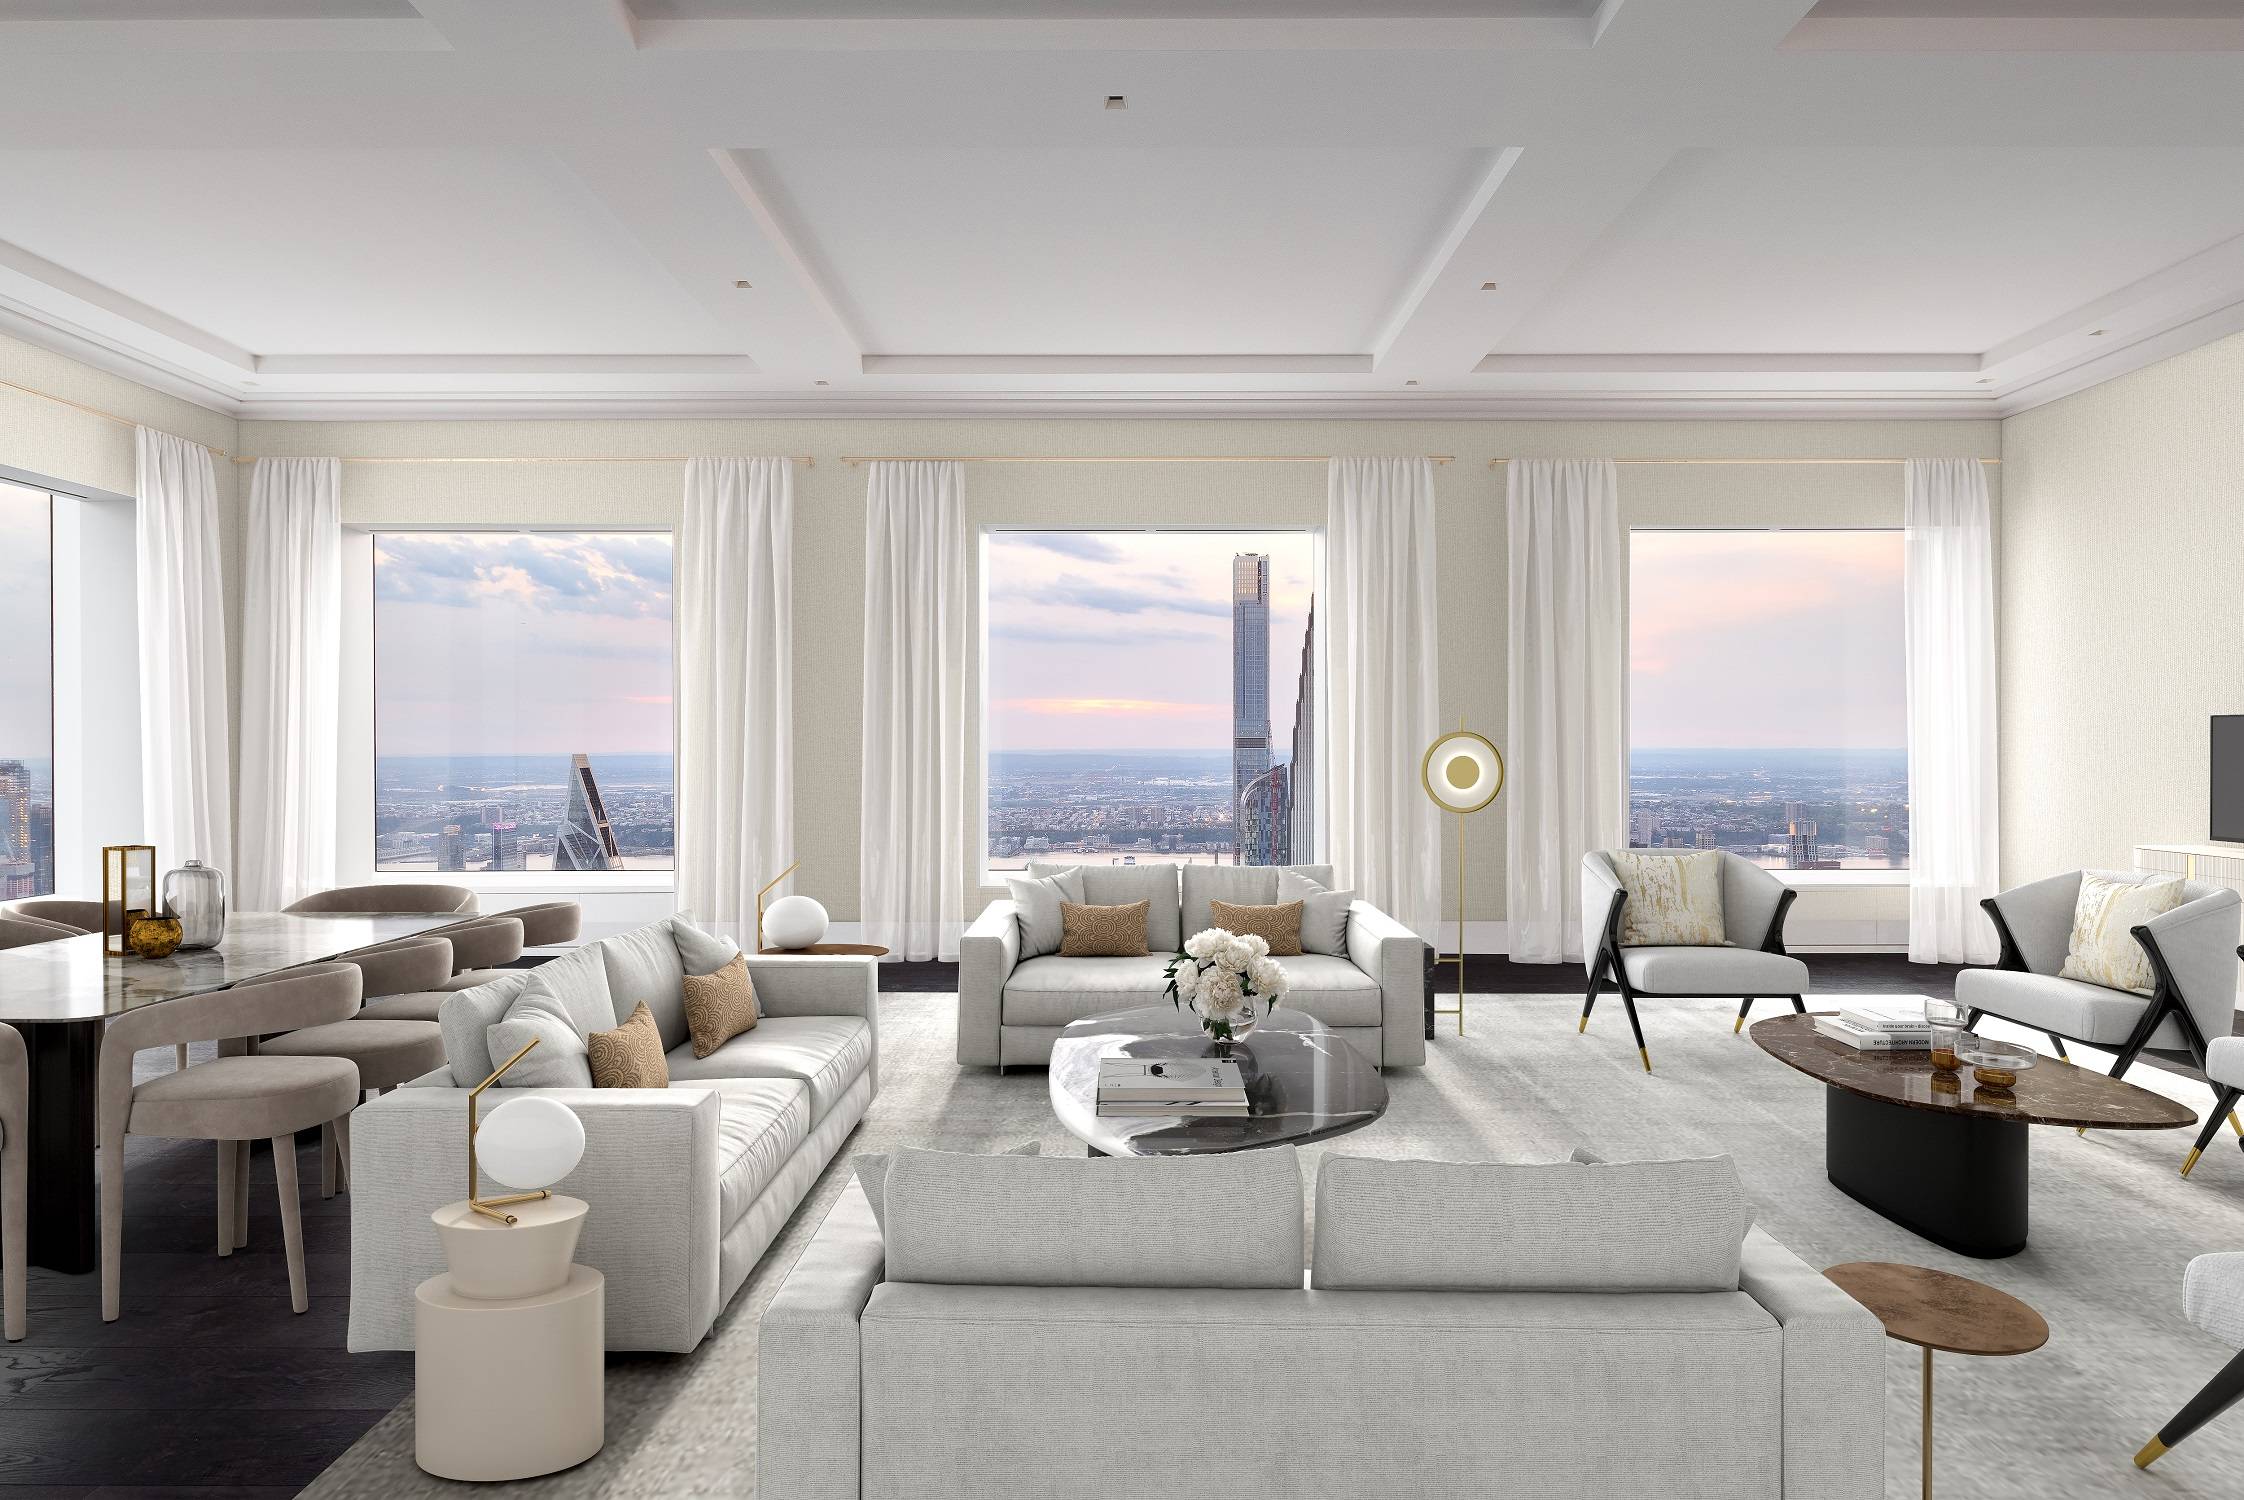 Penthouse 82 at 432 Park Avenue Impeccably Designed and Brand New Full Floor Penthouse Virtually Staged Photography Five Bedrooms Six Baths Two Powder Rooms 8, 054 sqft Penthouse 82 at ...